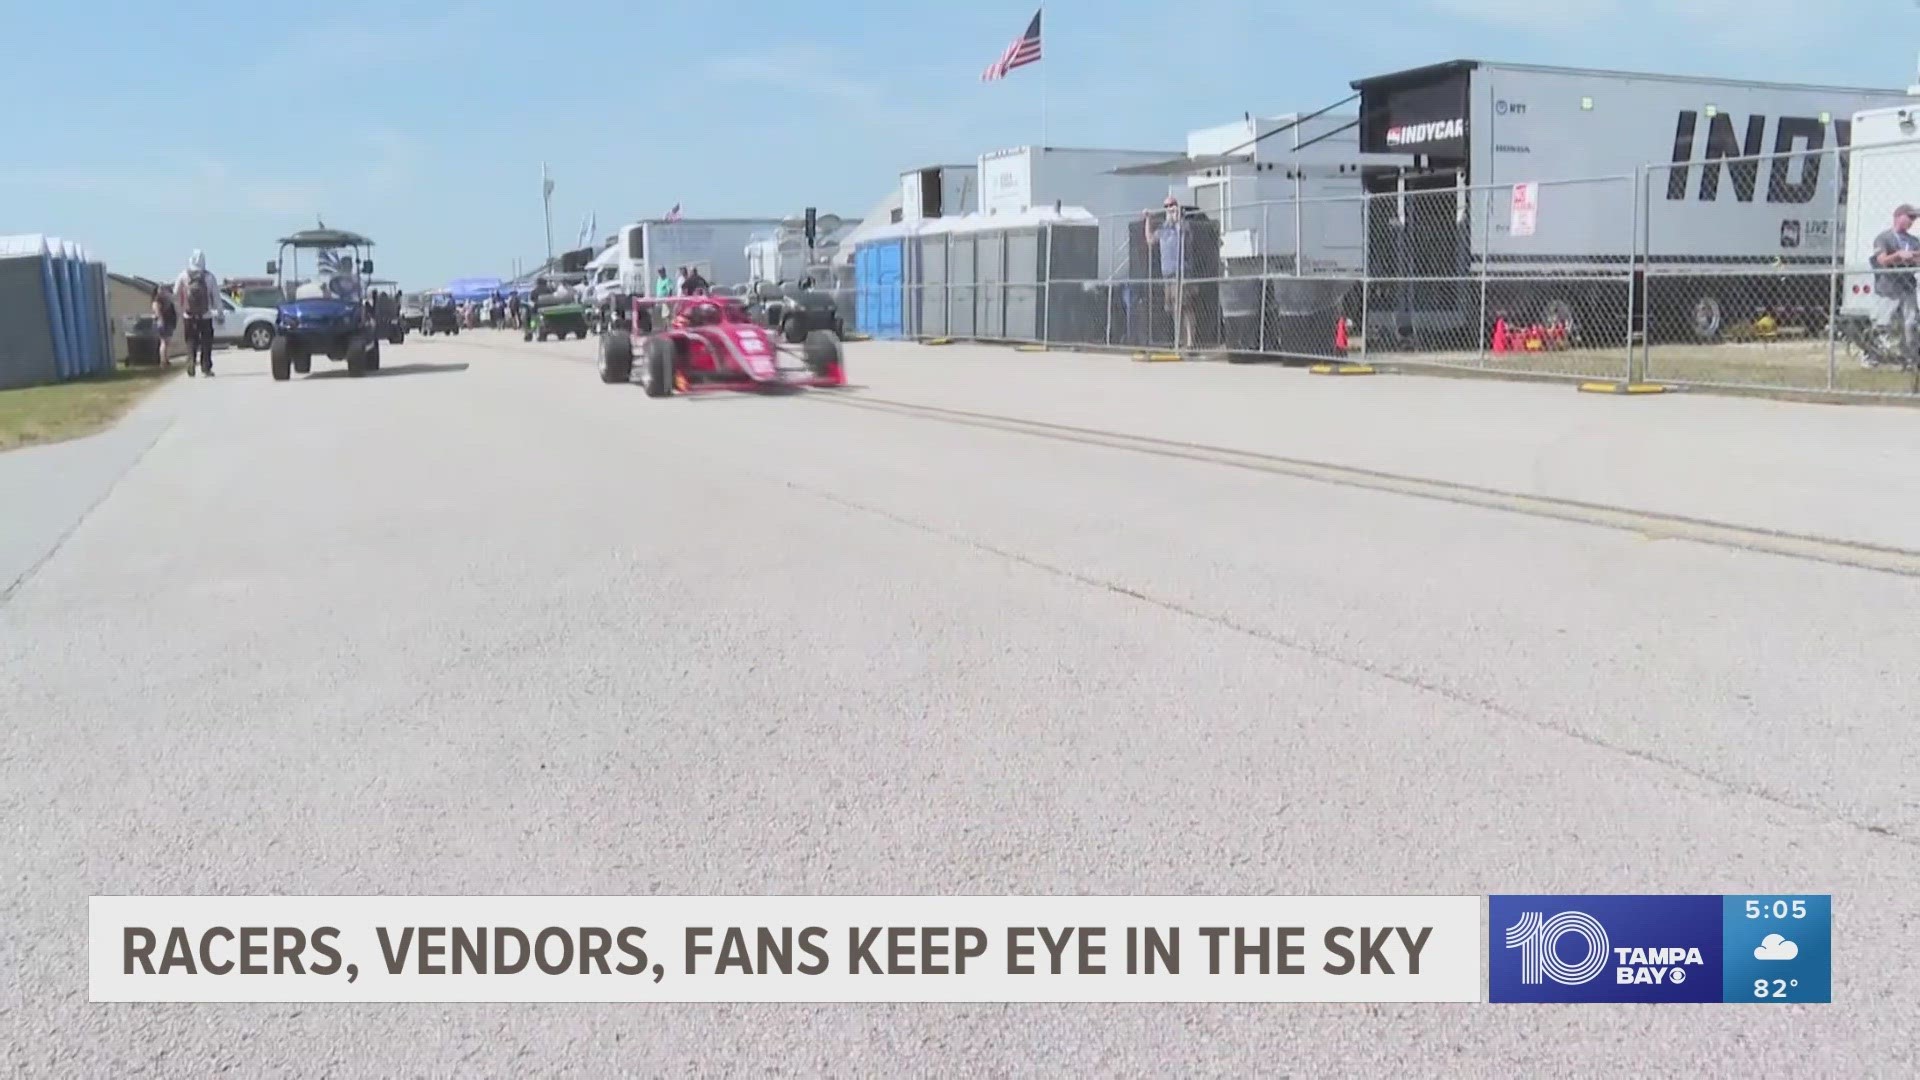 All eyes are on the skies as the weekend approaches, especially those of racers and fans taking part in this year's Firestone Grand Prix of St. Petersburg.